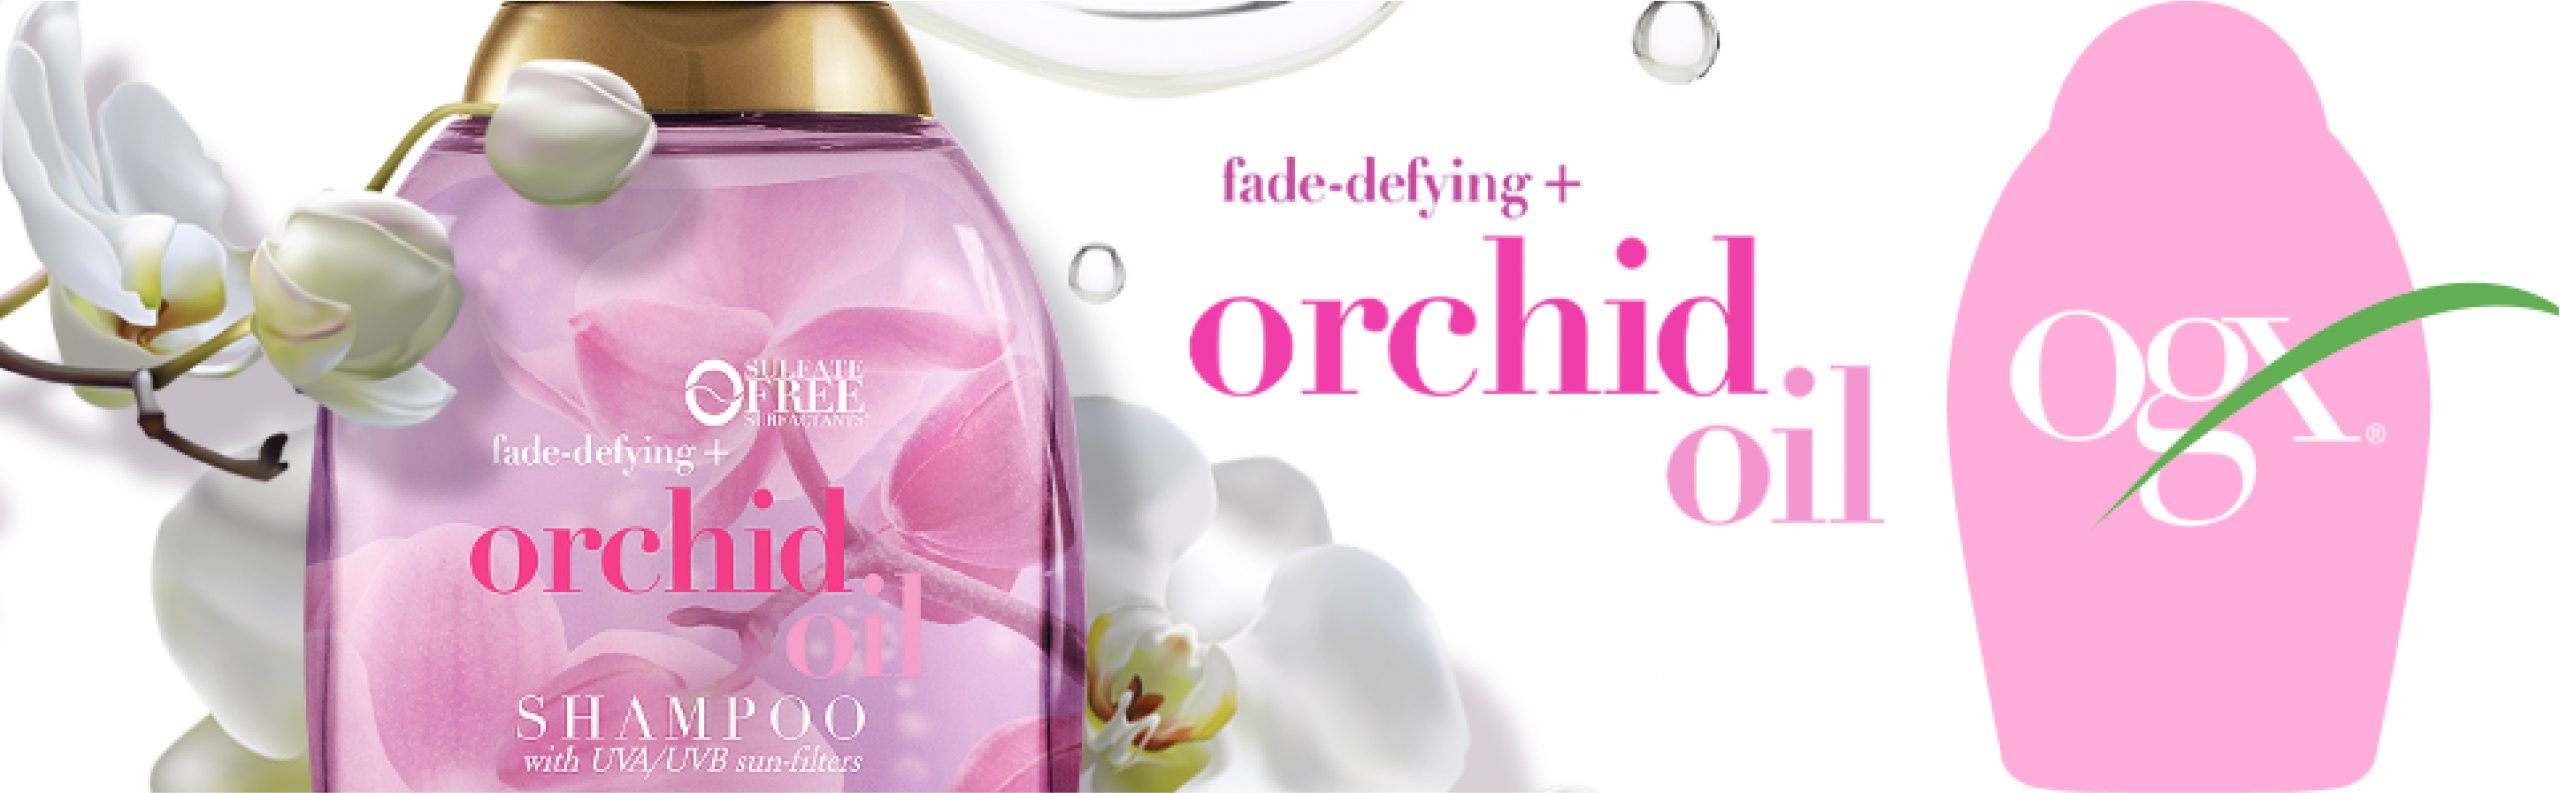 Orchid oil